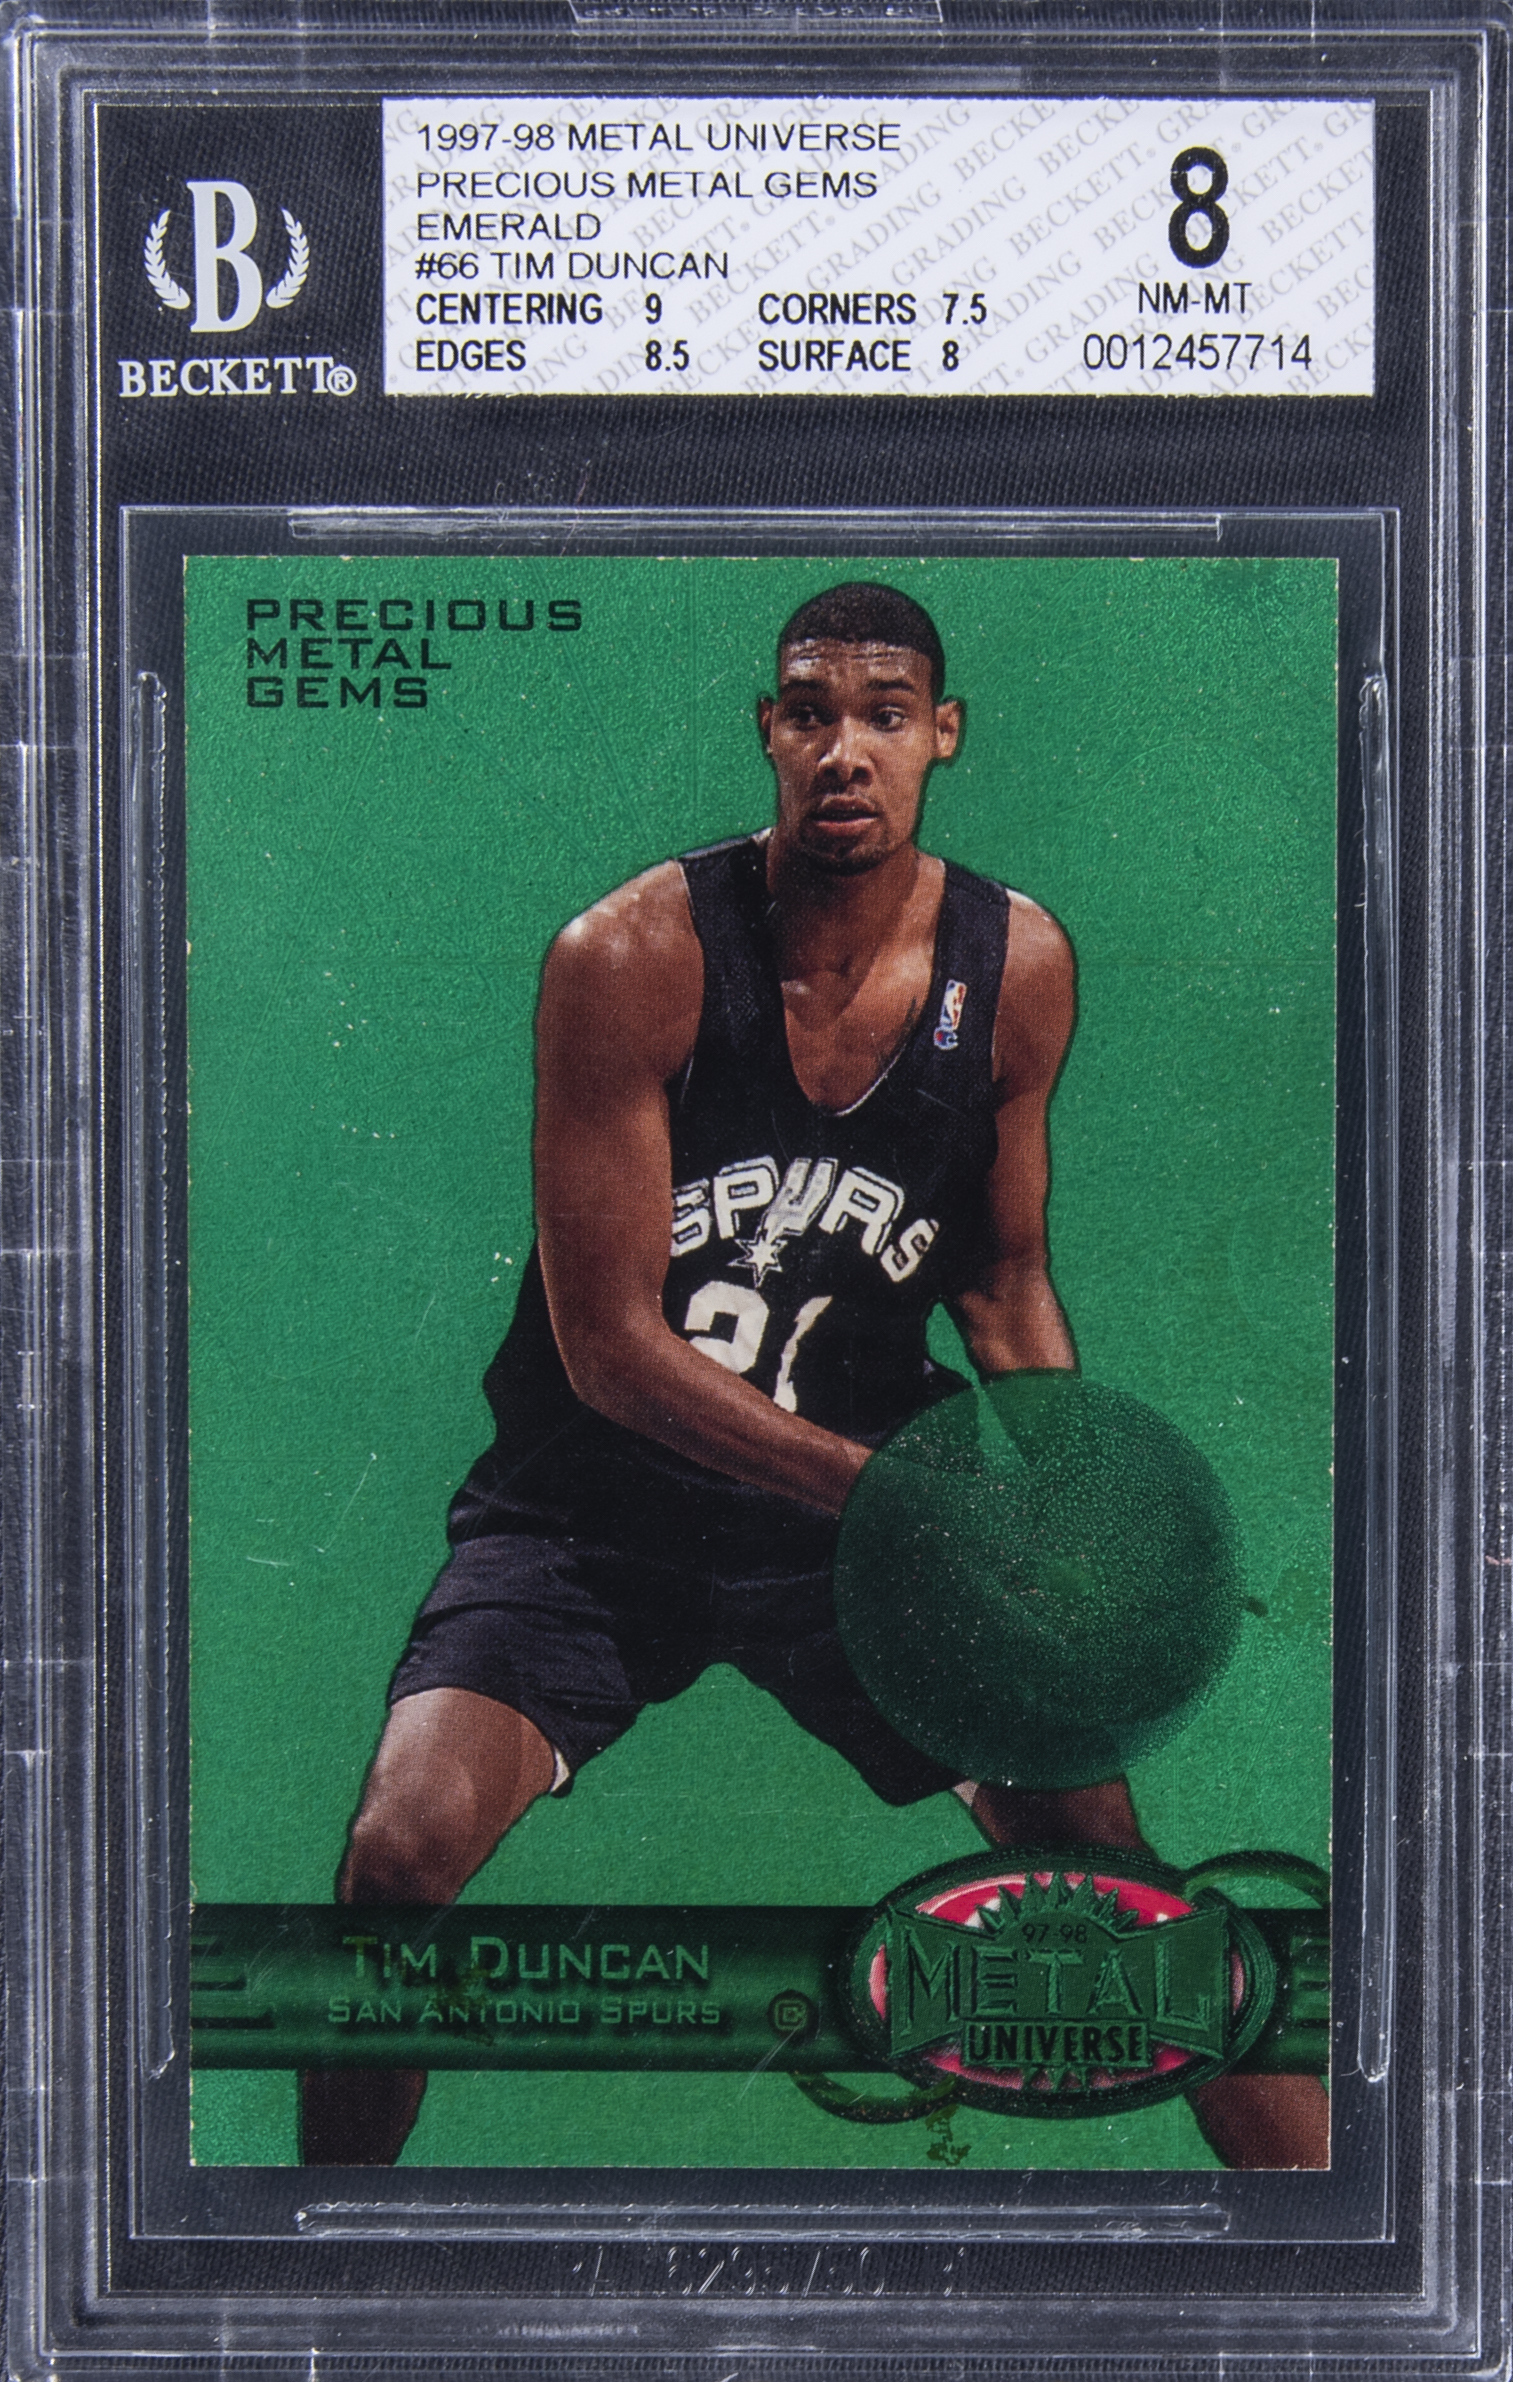 The Most Expensive Tim Duncan Basketball Card Ever Sold